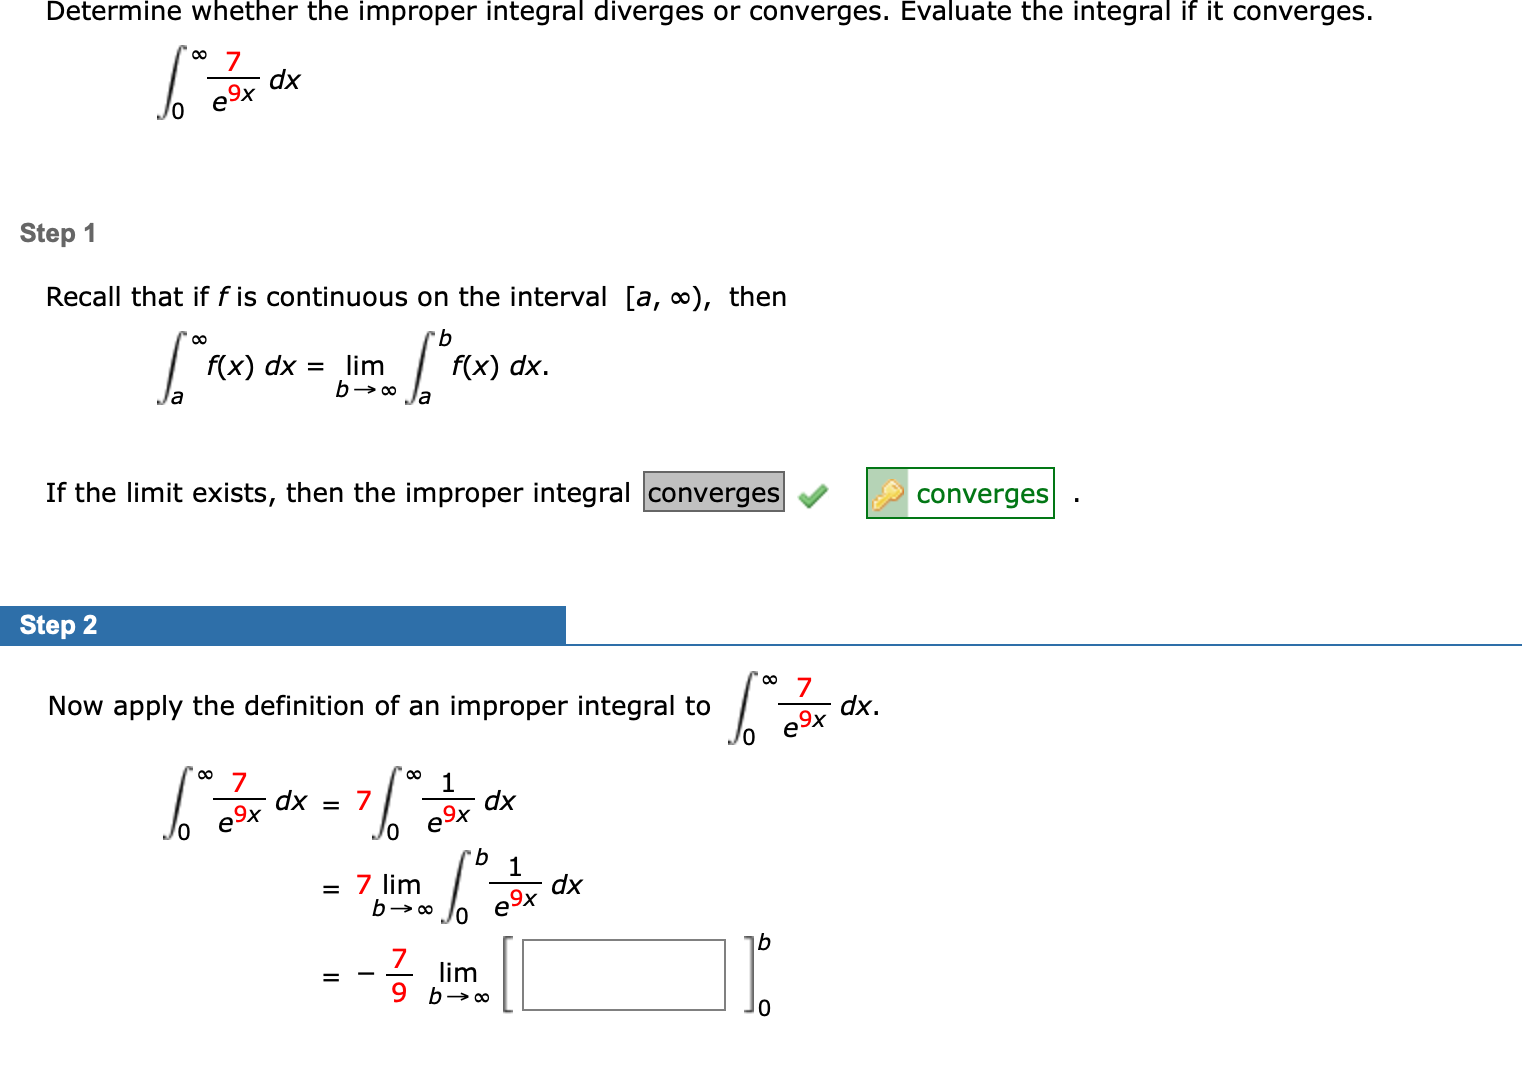 Determine whether the improper integral diverges or converges. Evaluate the integral if it converges.
dx
